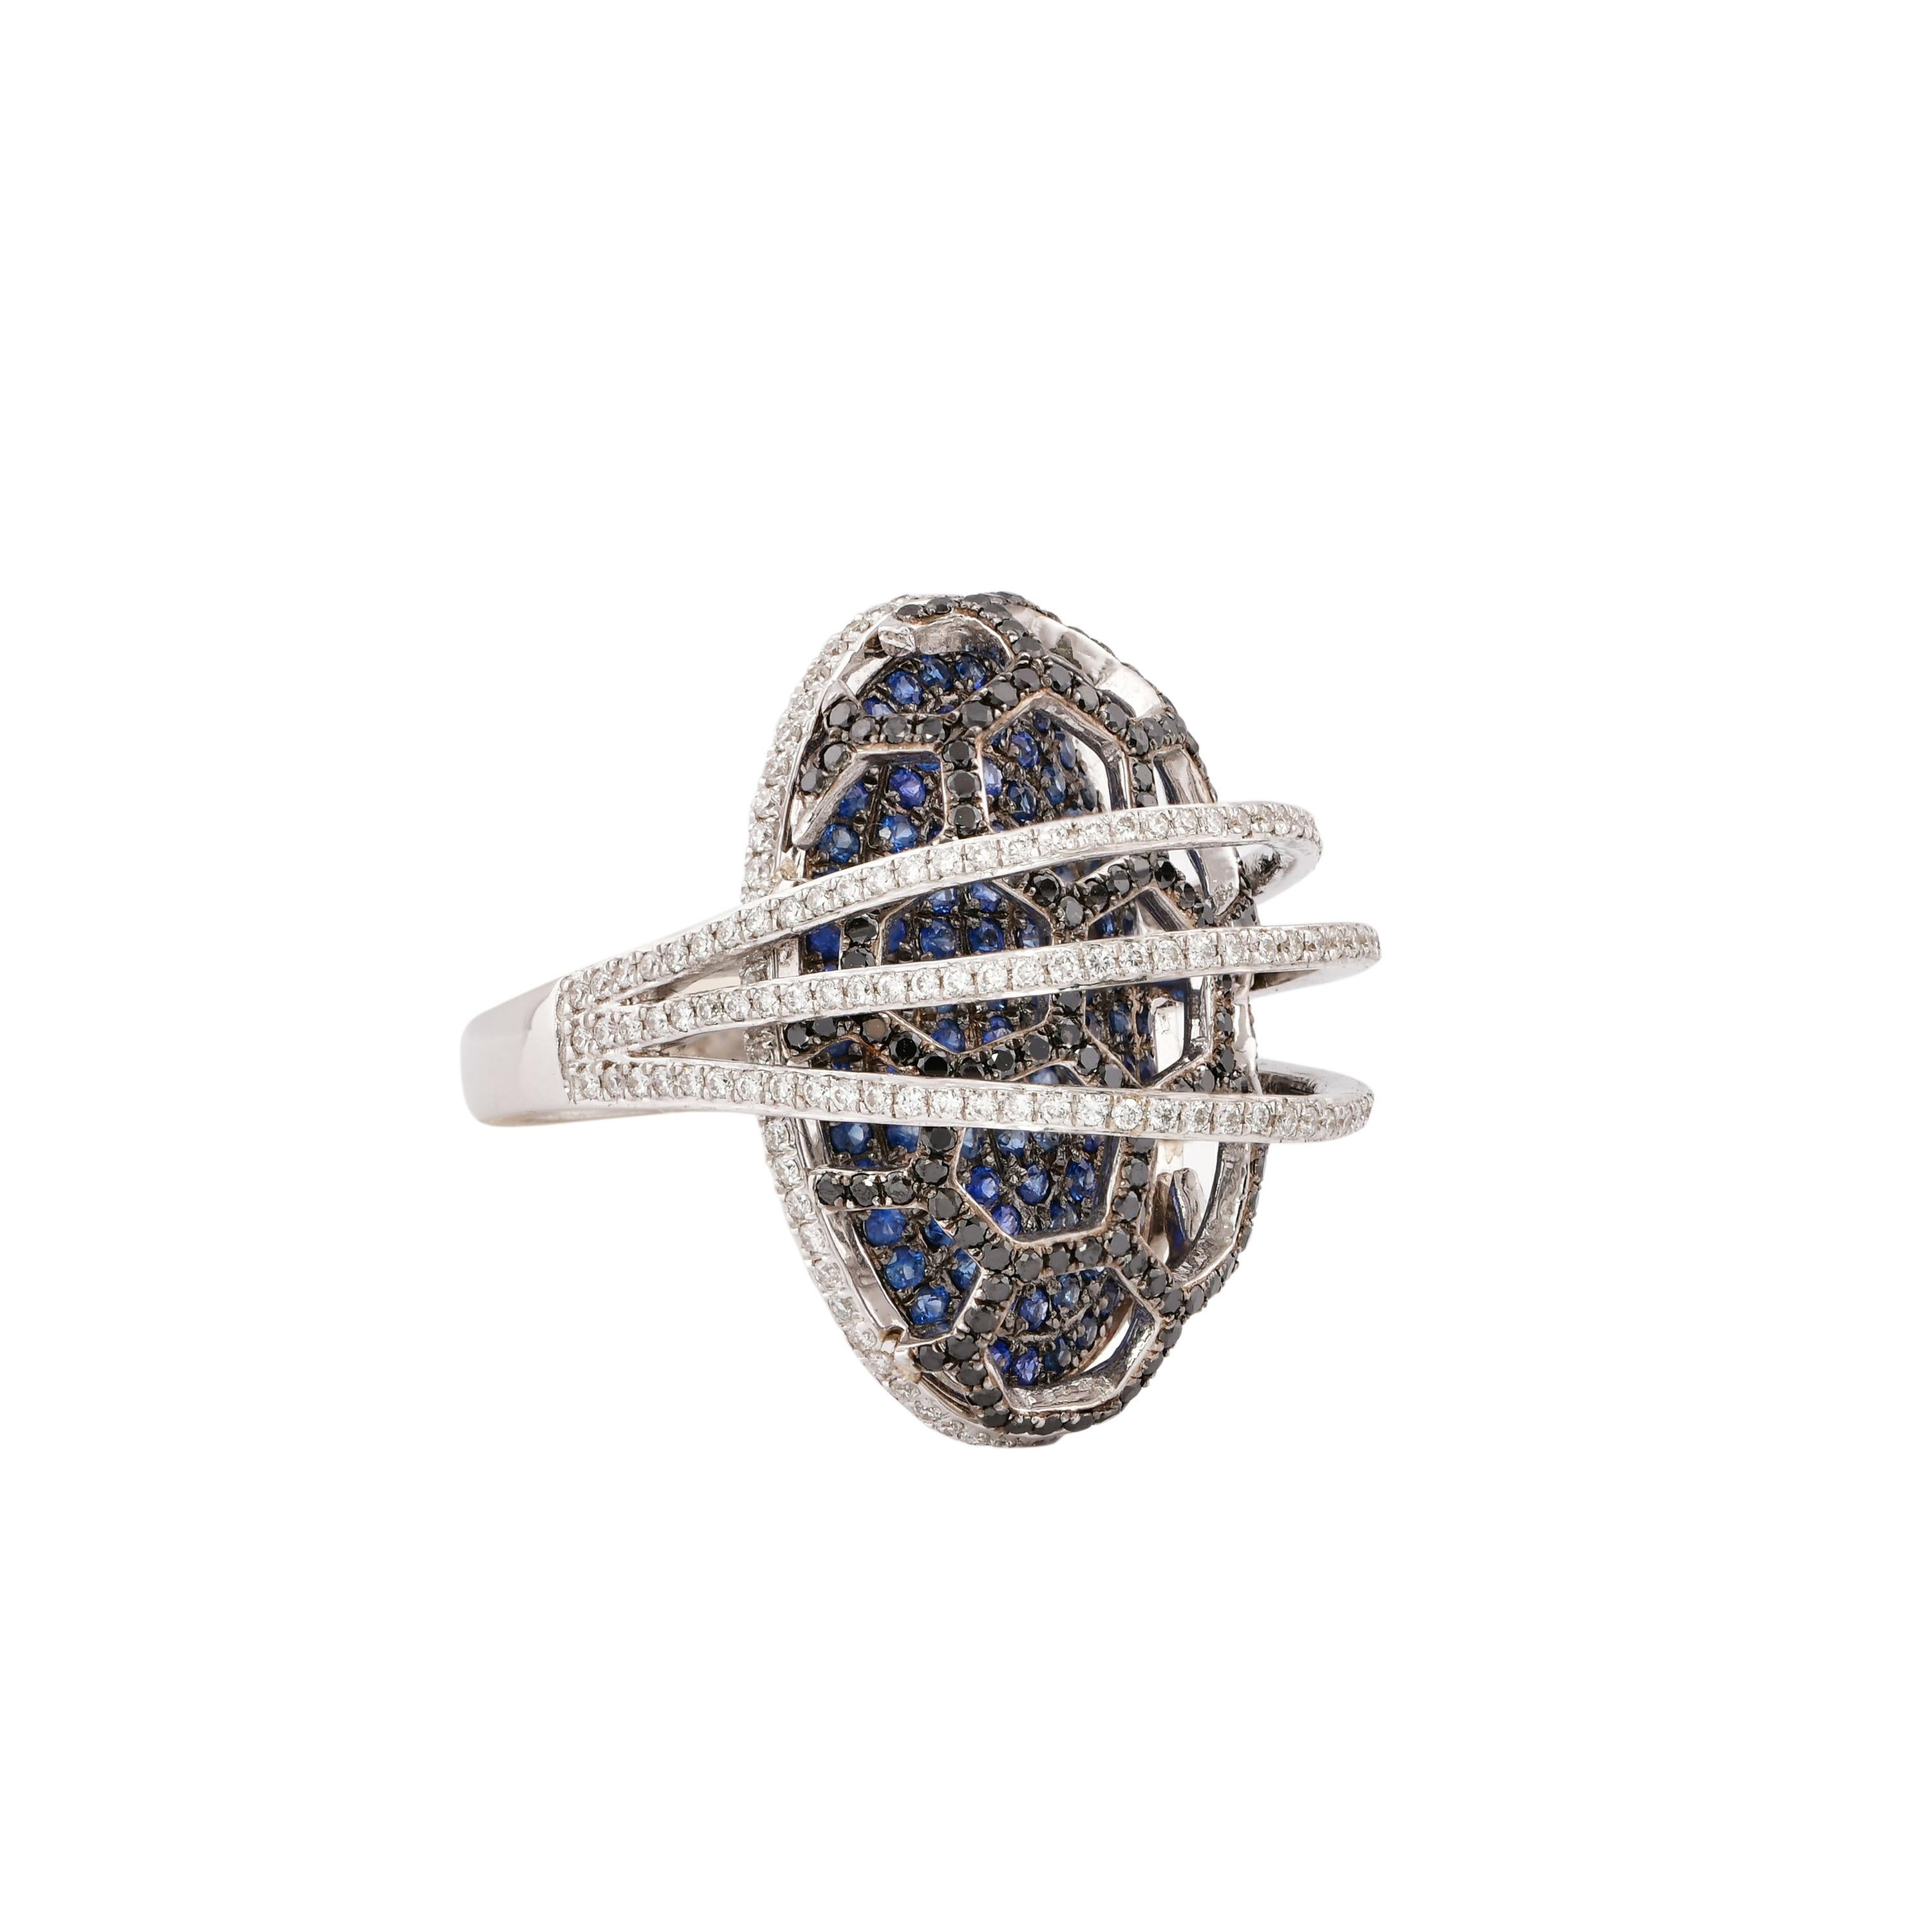 Sunita Nahata presents a collection of fancy cocktail rings with gorgeous gemstones. This ring uses a pave base of blue sapphire with an architecturally constructed black and white diamond cage on top. This unique and contrasting design presents a